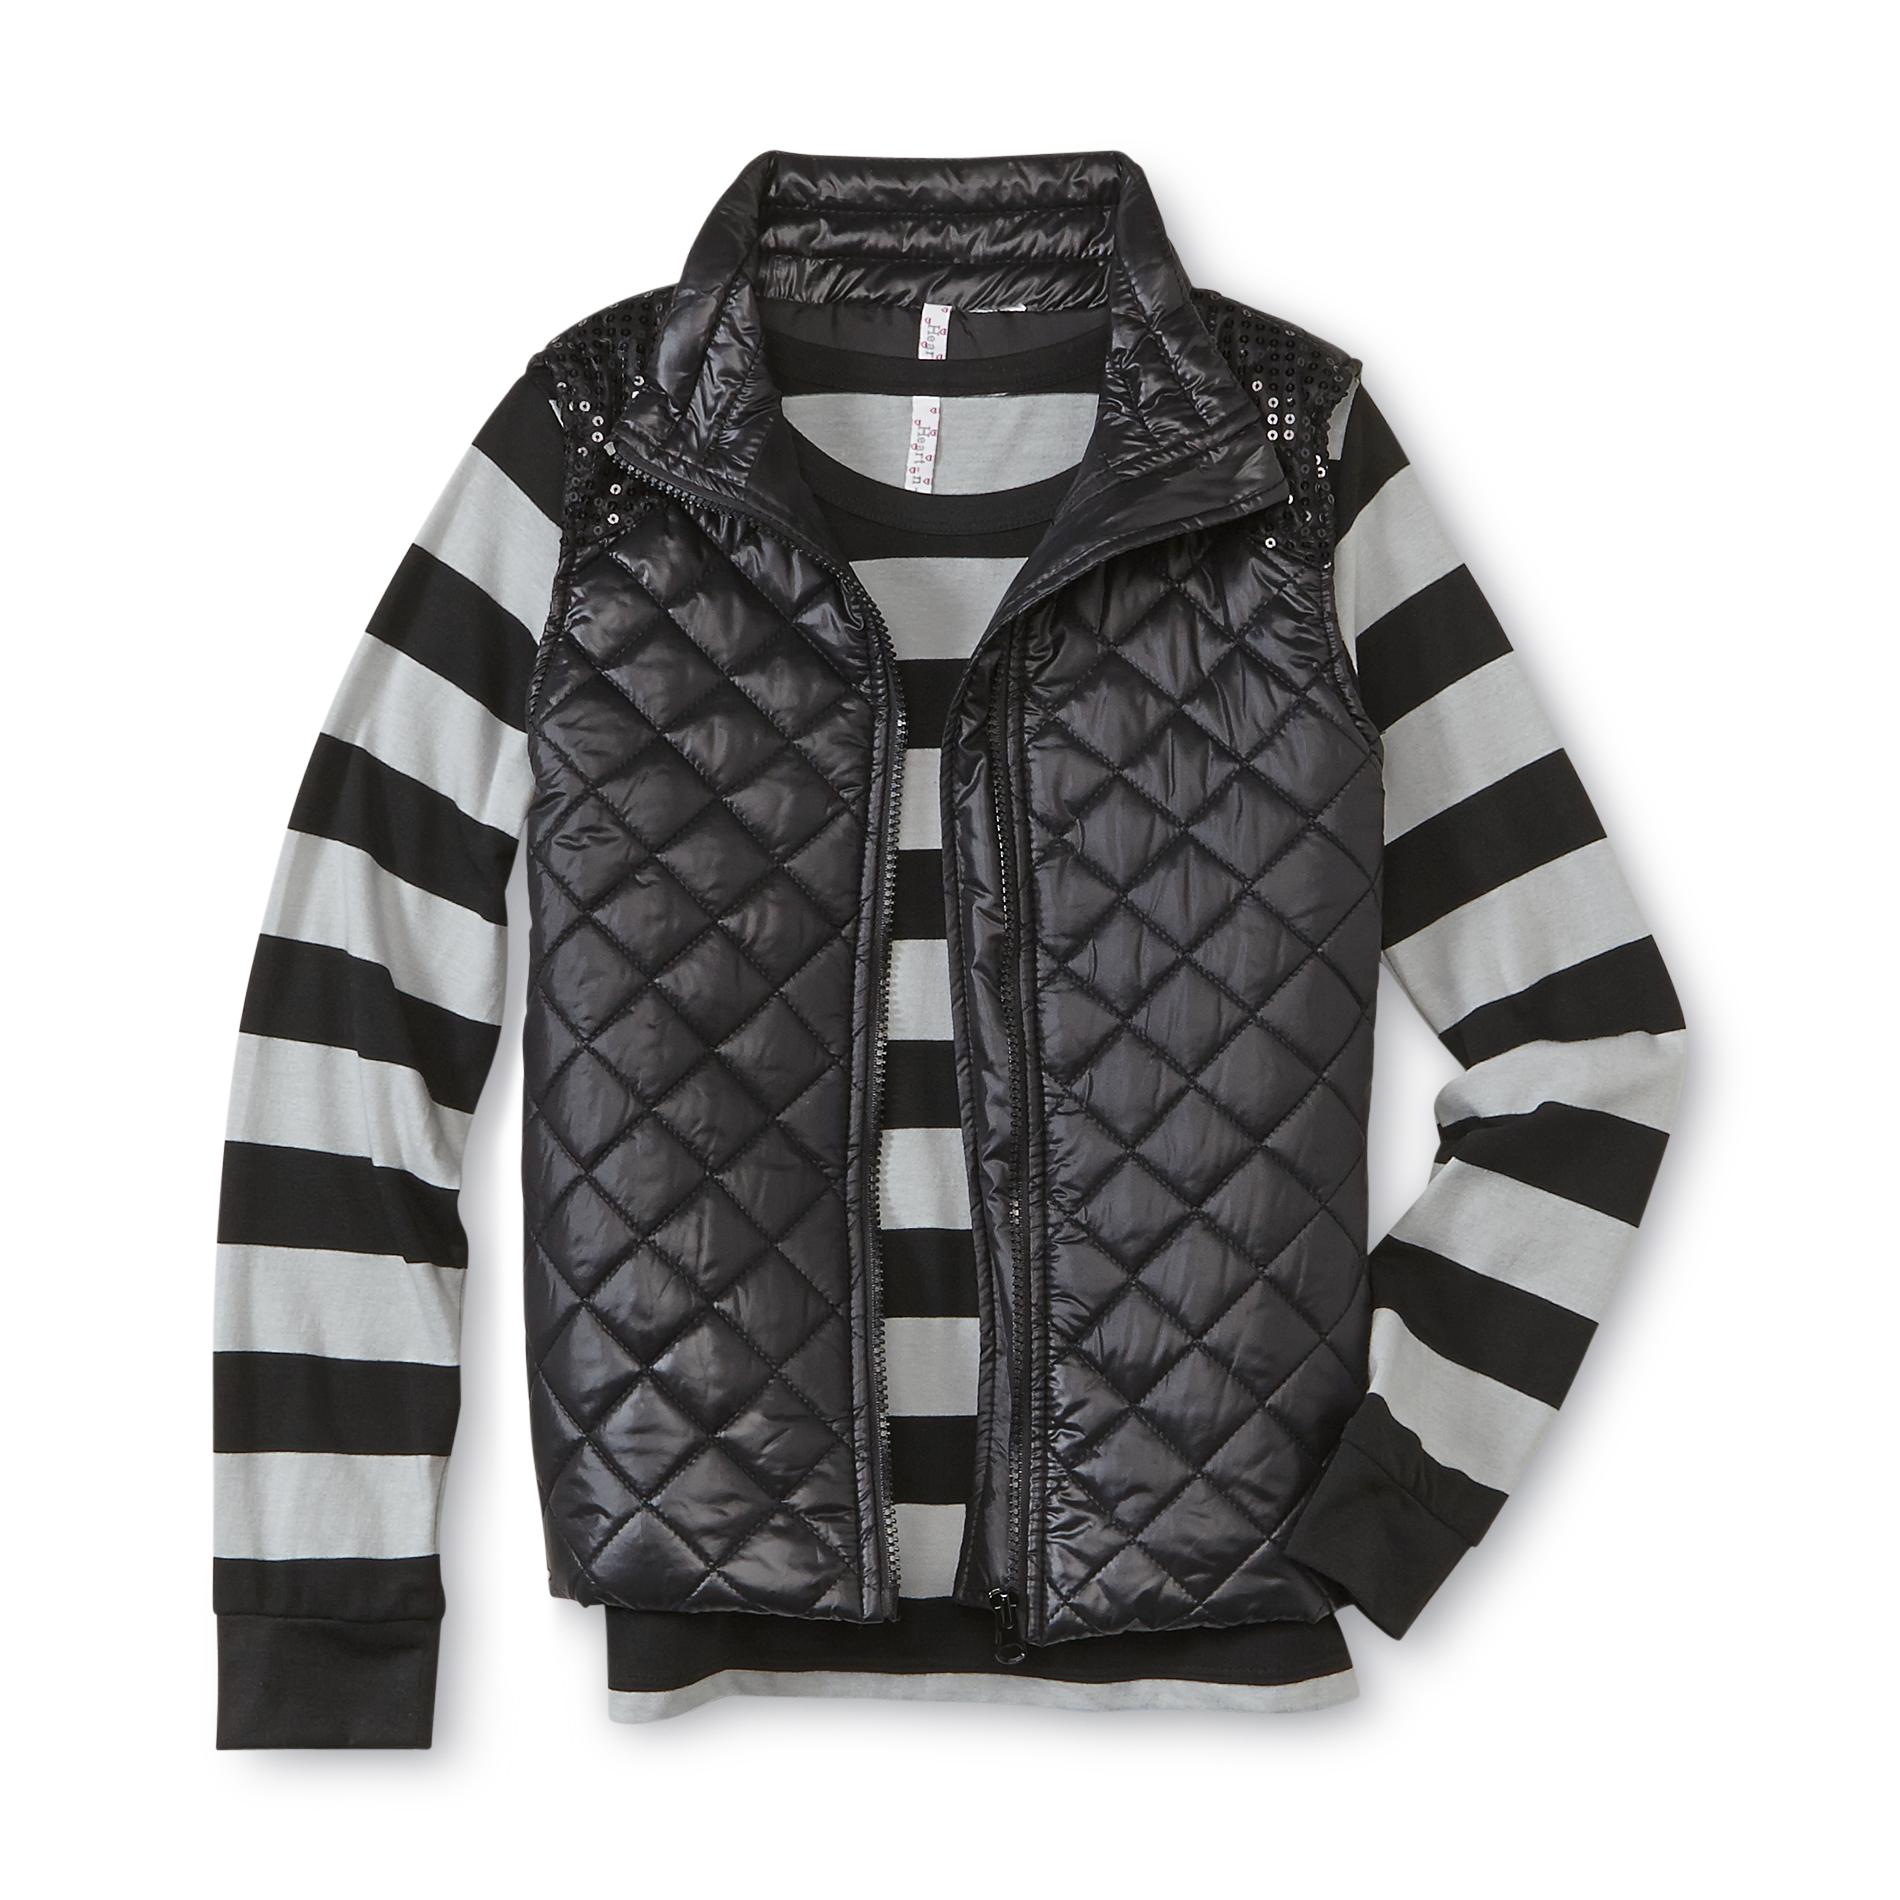 NYC Knitwear Girl's Top & Puffer Vest - Striped